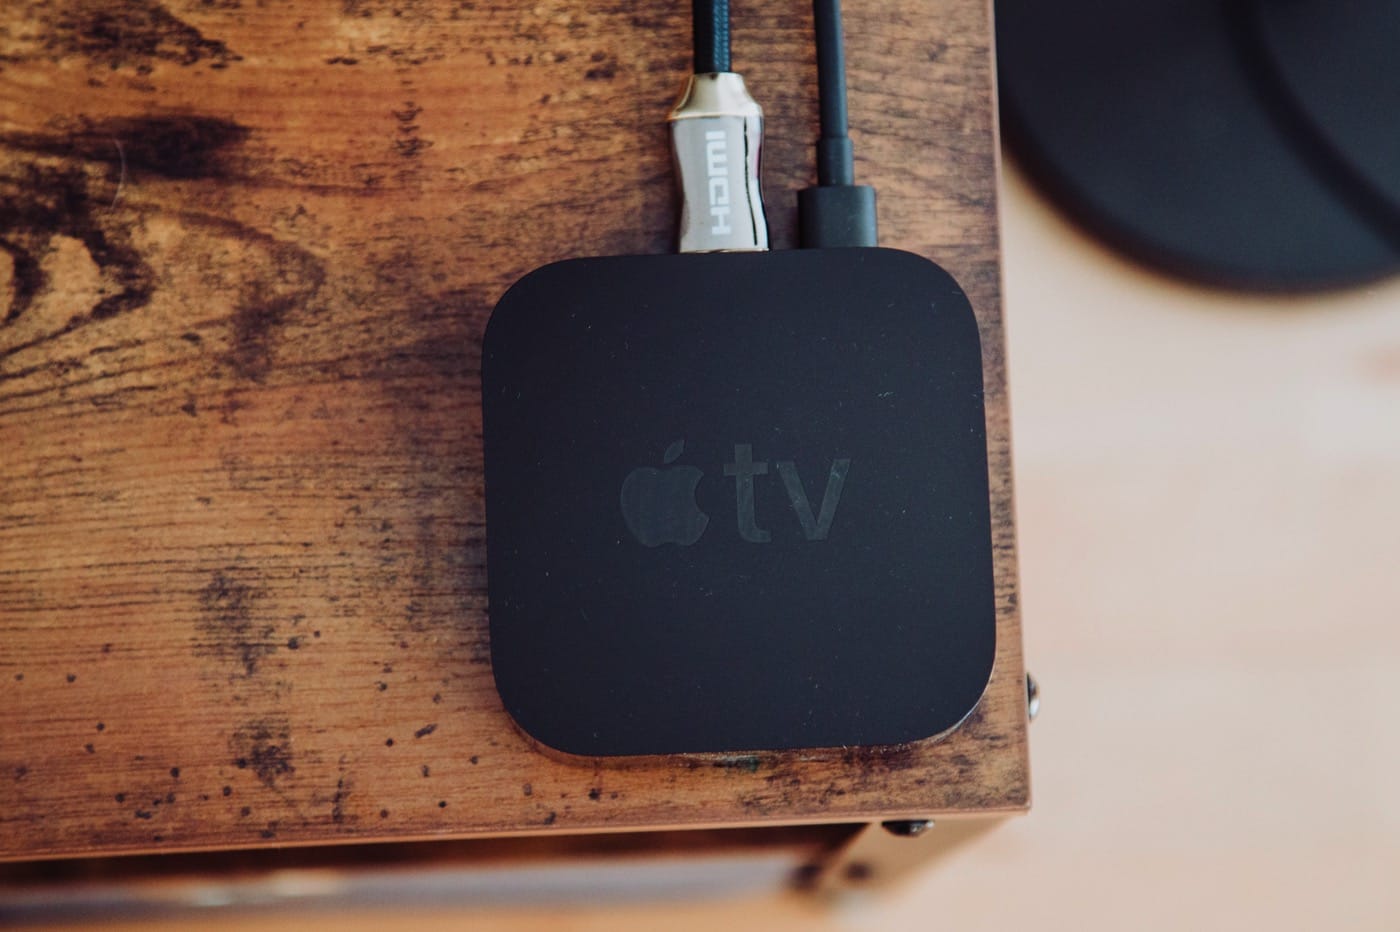 Apple TV can block you if you don’t have an iPhone